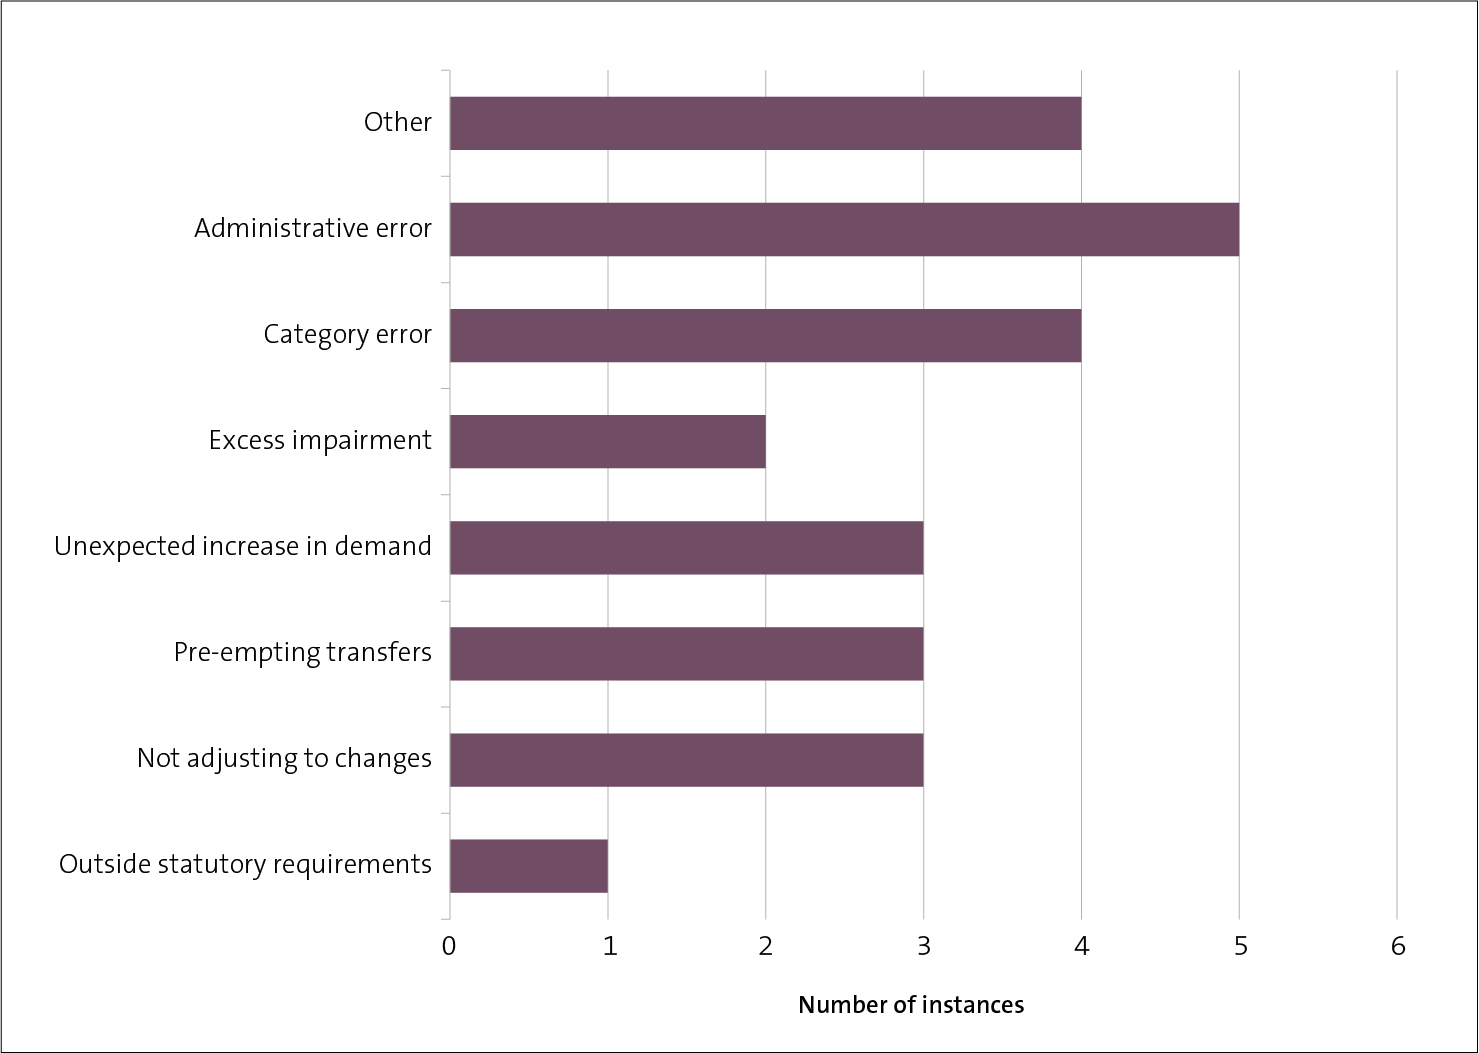 Figure 7 - Reasons for unappropriated expenditure in 2019/20, by number of instances